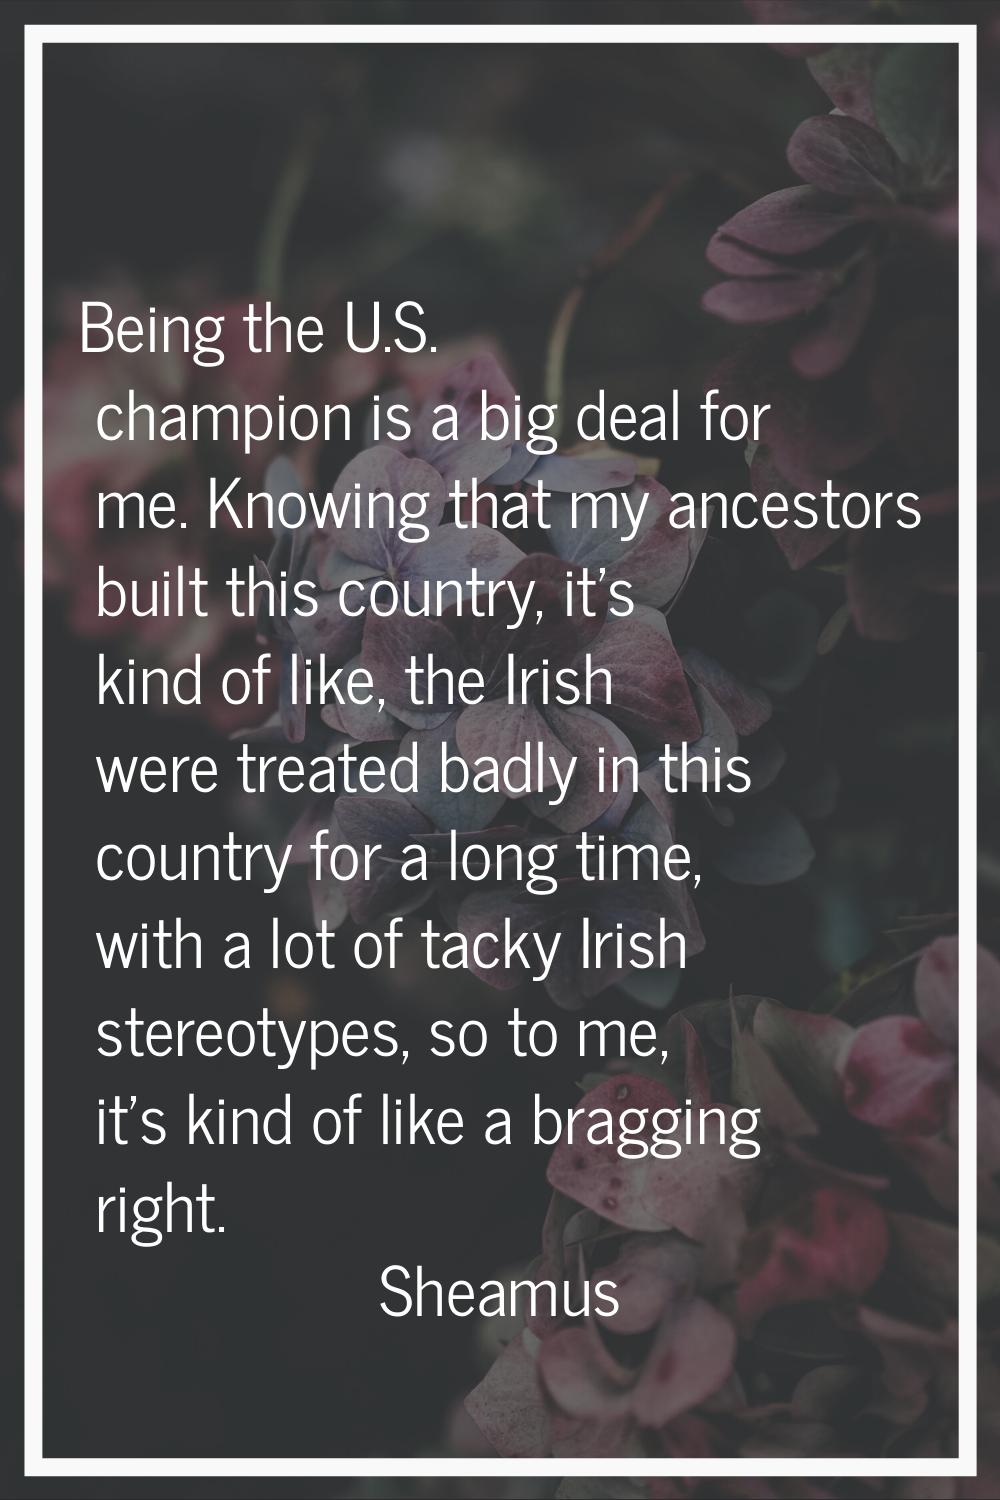 Being the U.S. champion is a big deal for me. Knowing that my ancestors built this country, it's ki